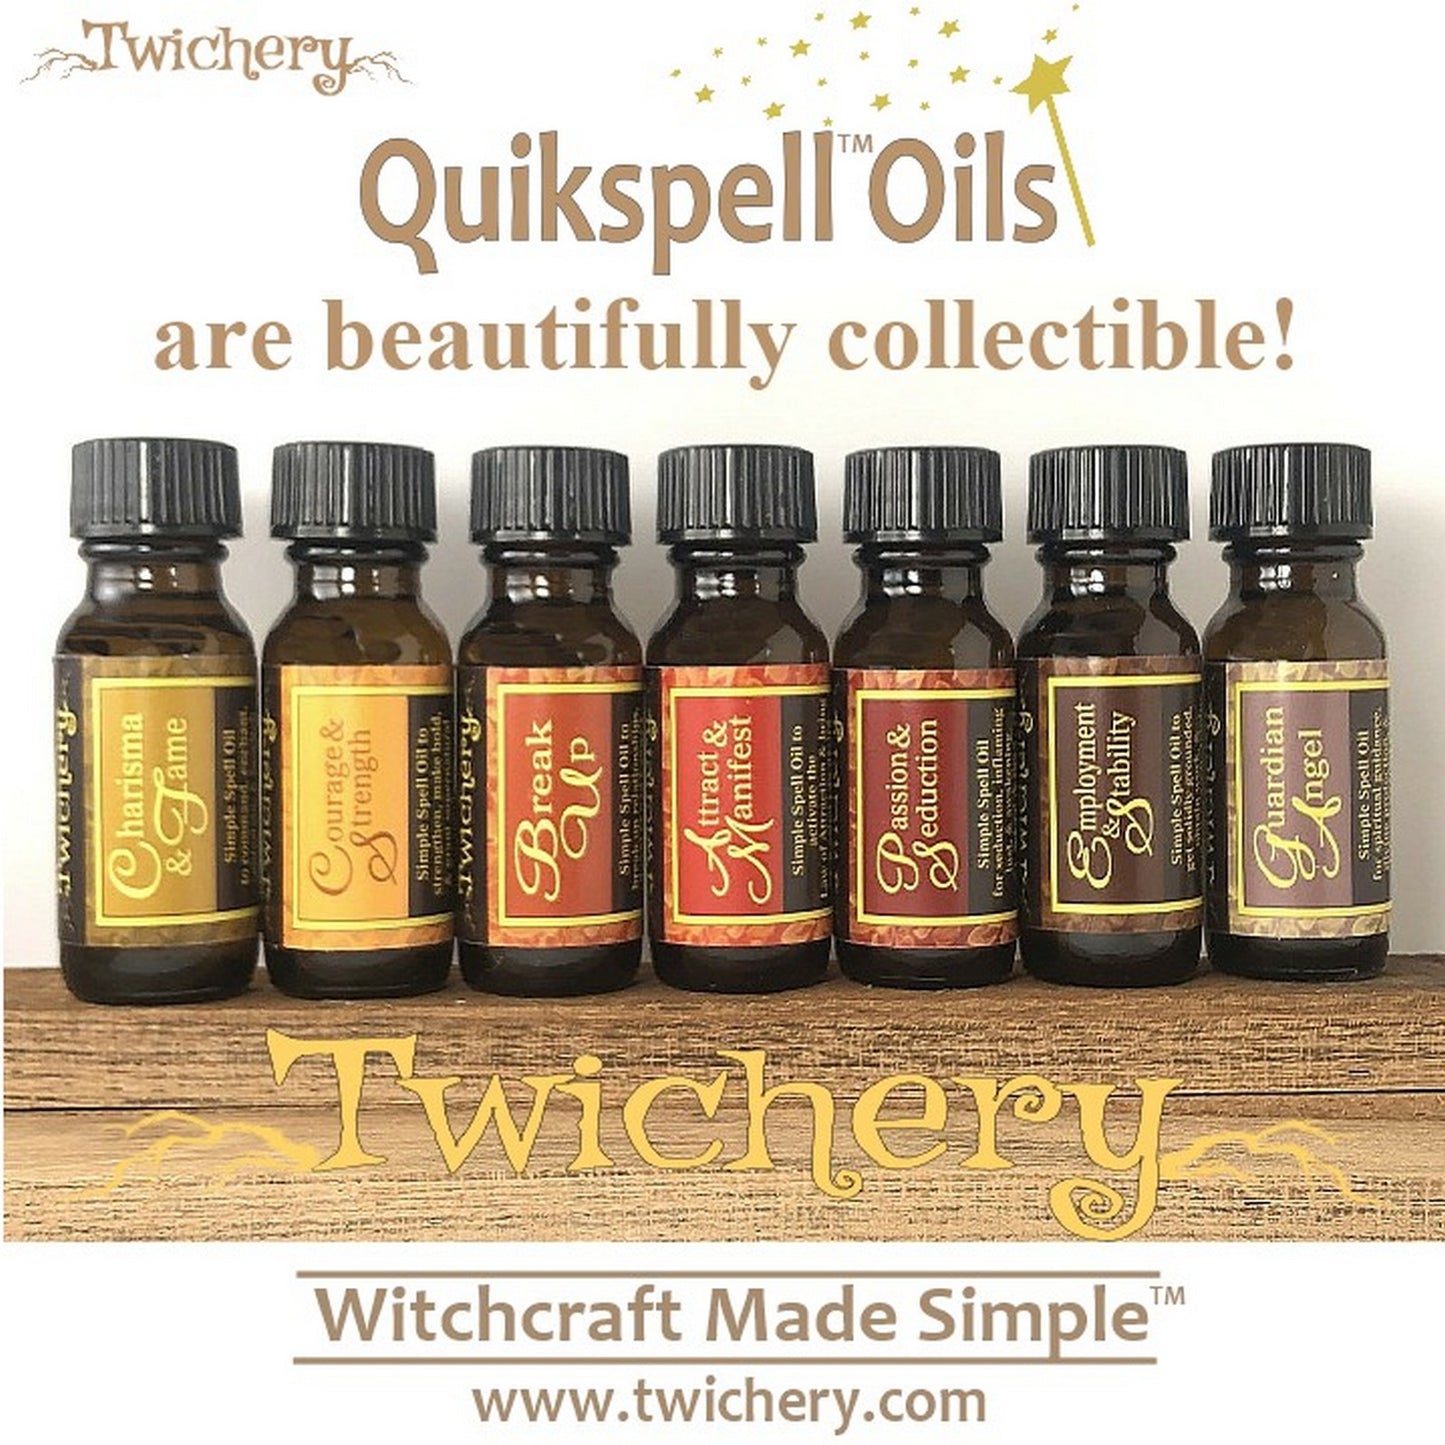 Collect all 24 Twichery Quikspell Oils for all your magickal needs, including new beginnings! Hoodoo, Voodoo, Wicca, Witchcraft Made Simple